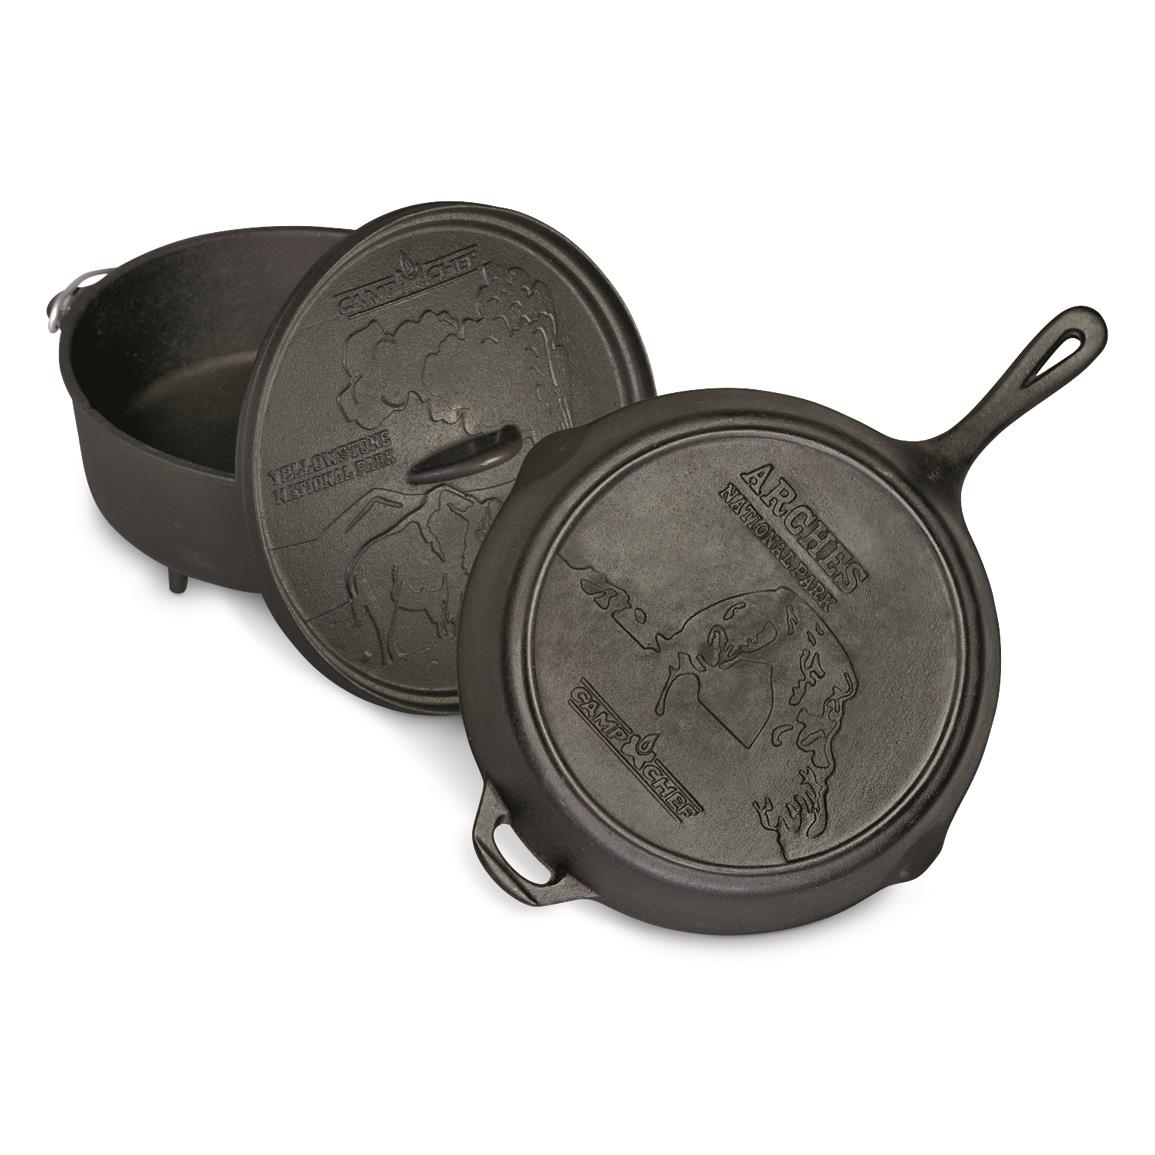 National Parks design on lid and bottom of frying pan